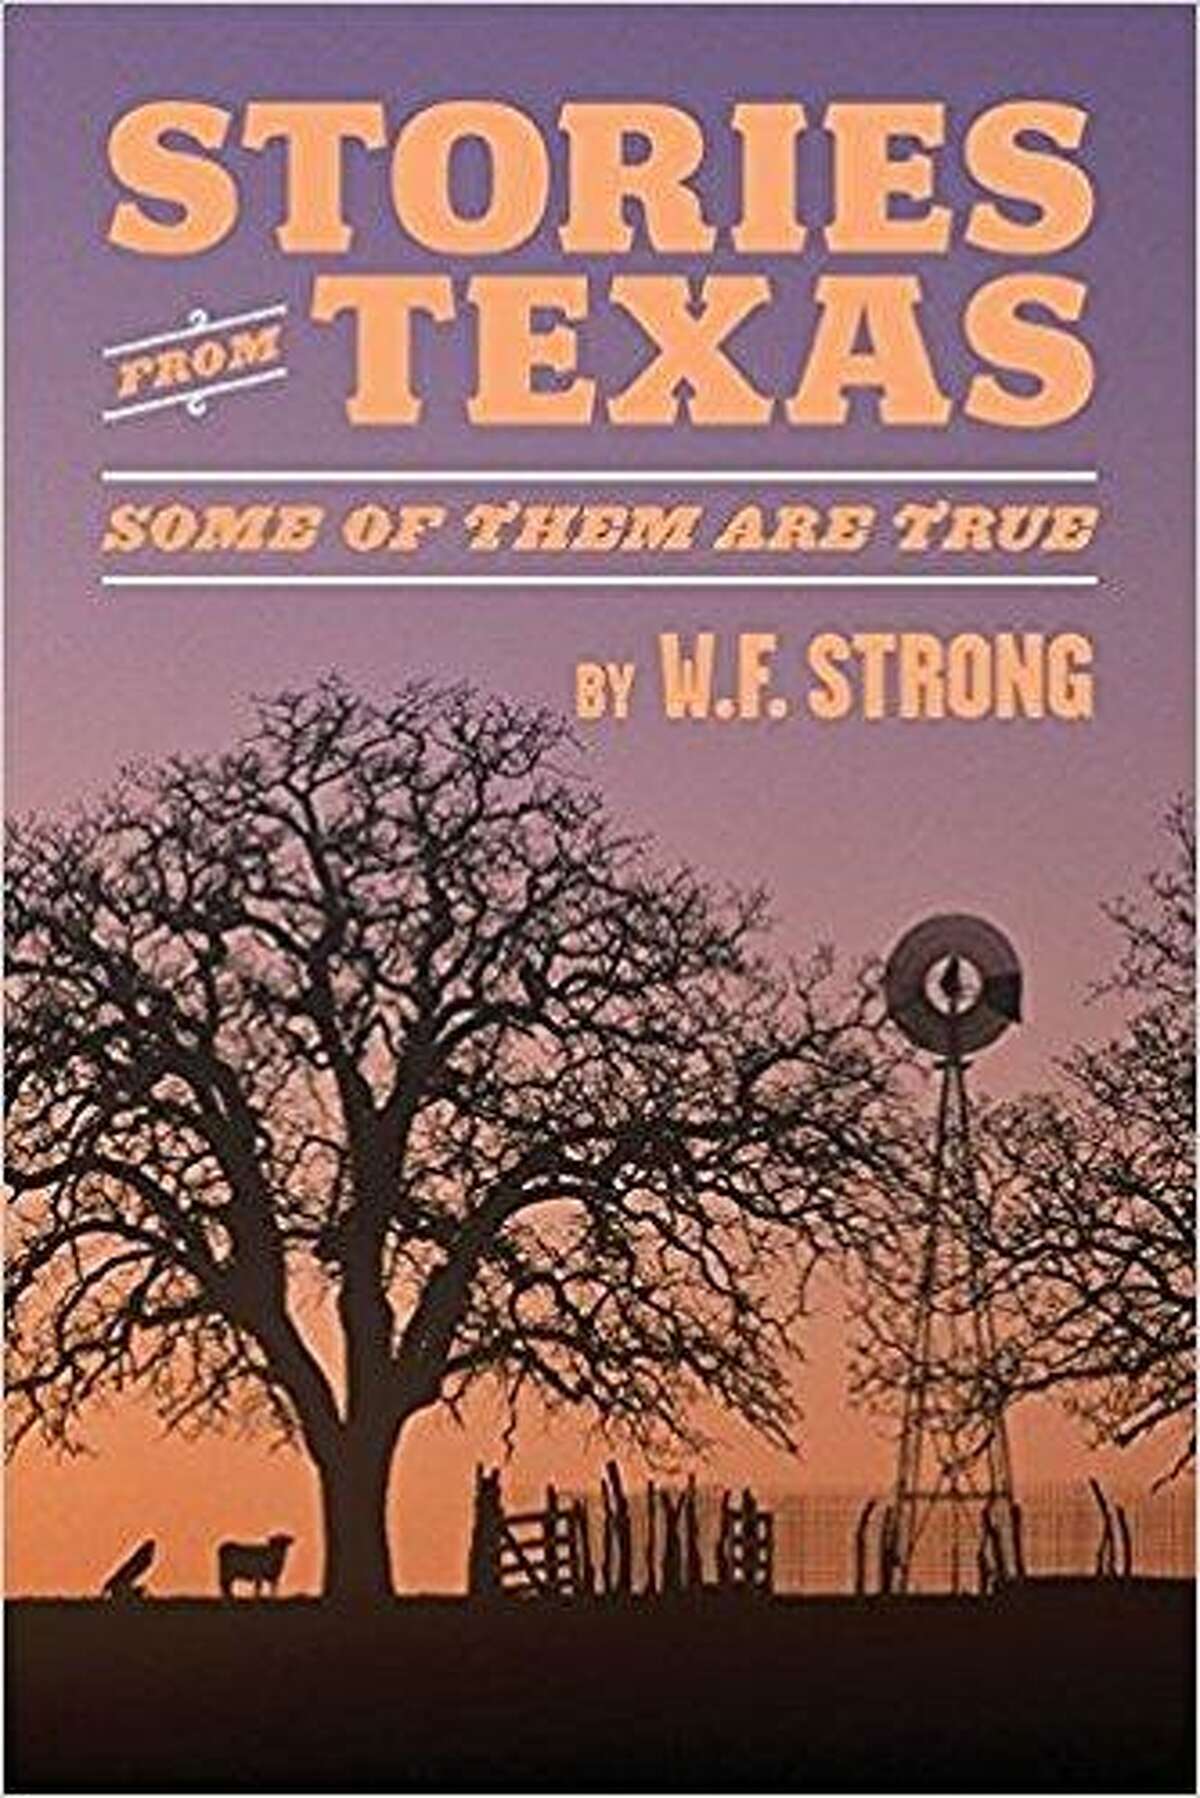 The book “Stories from Texas: Some of them are True,” by W.F. Strong.